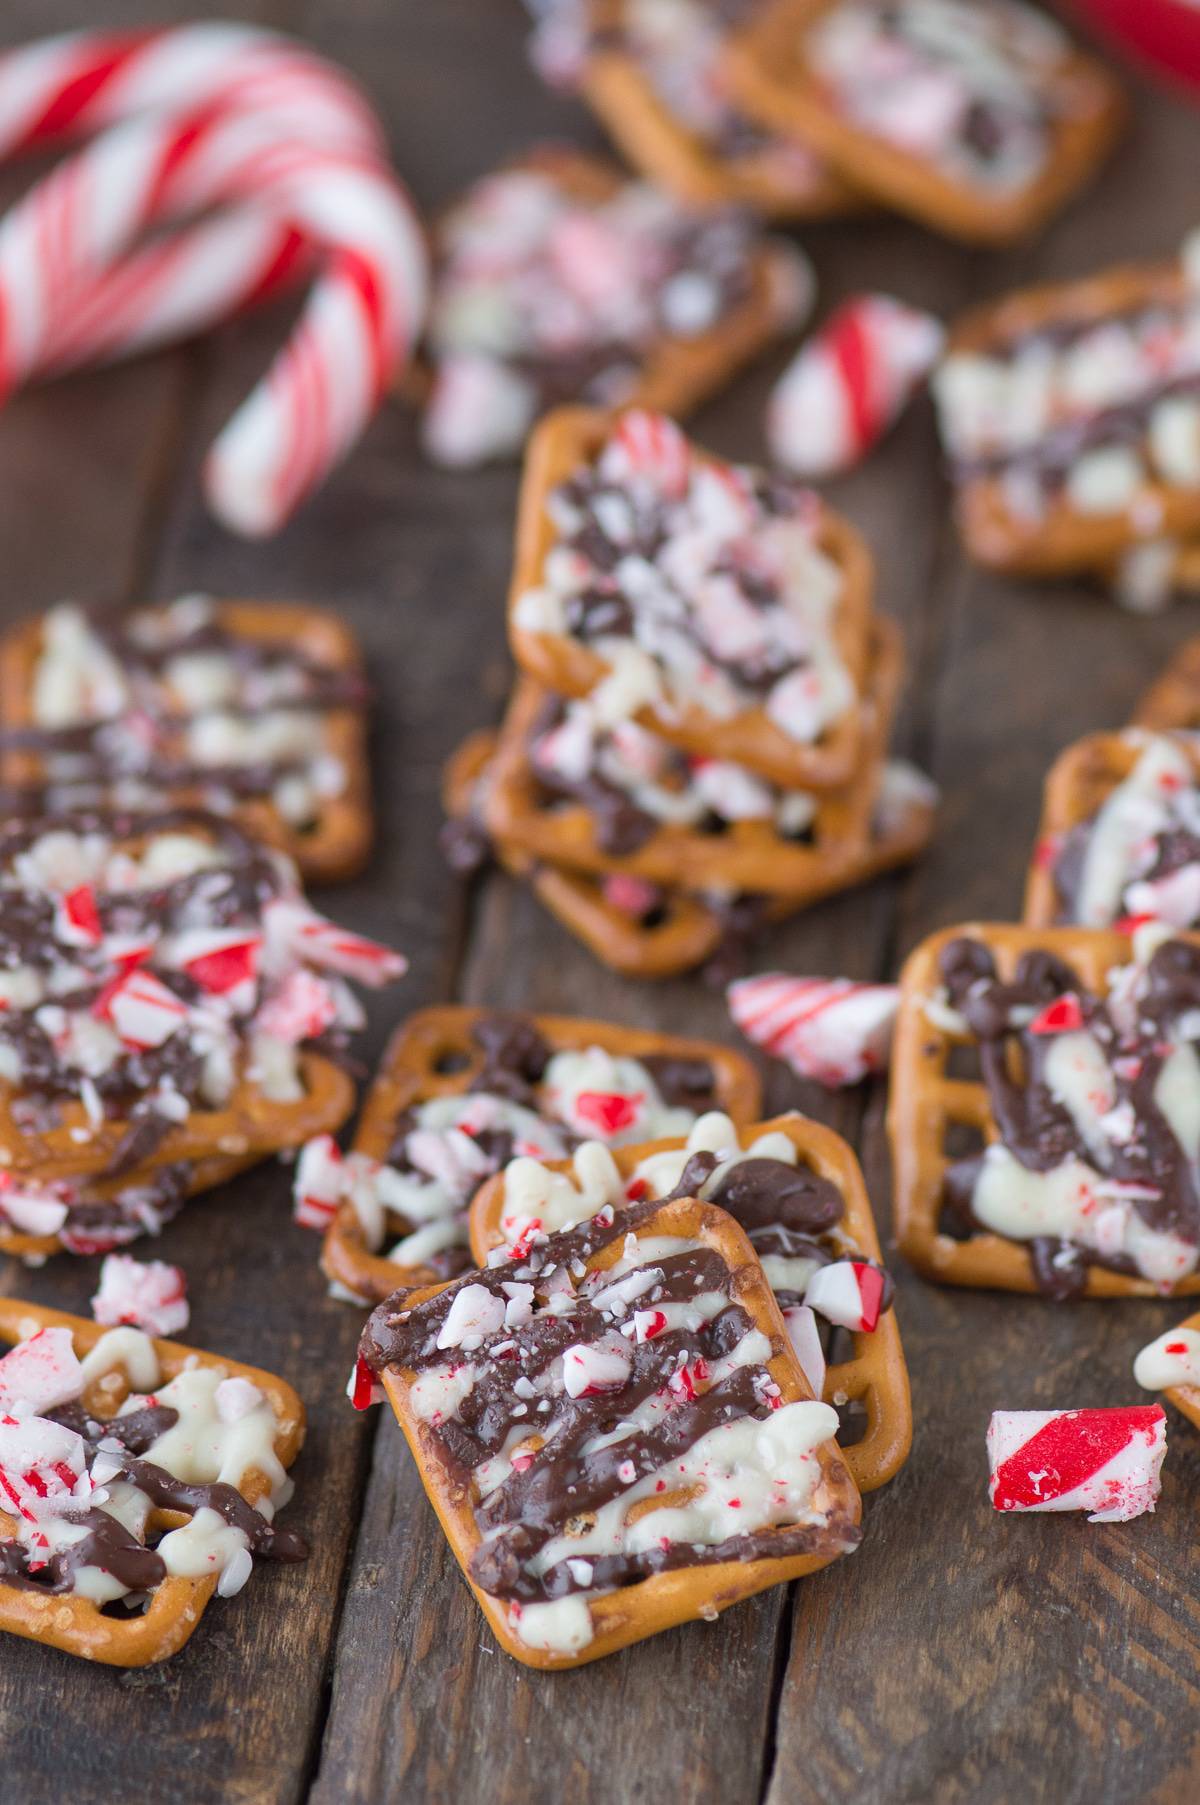 peppermint bark pretzel on wood background with candy cane pieces